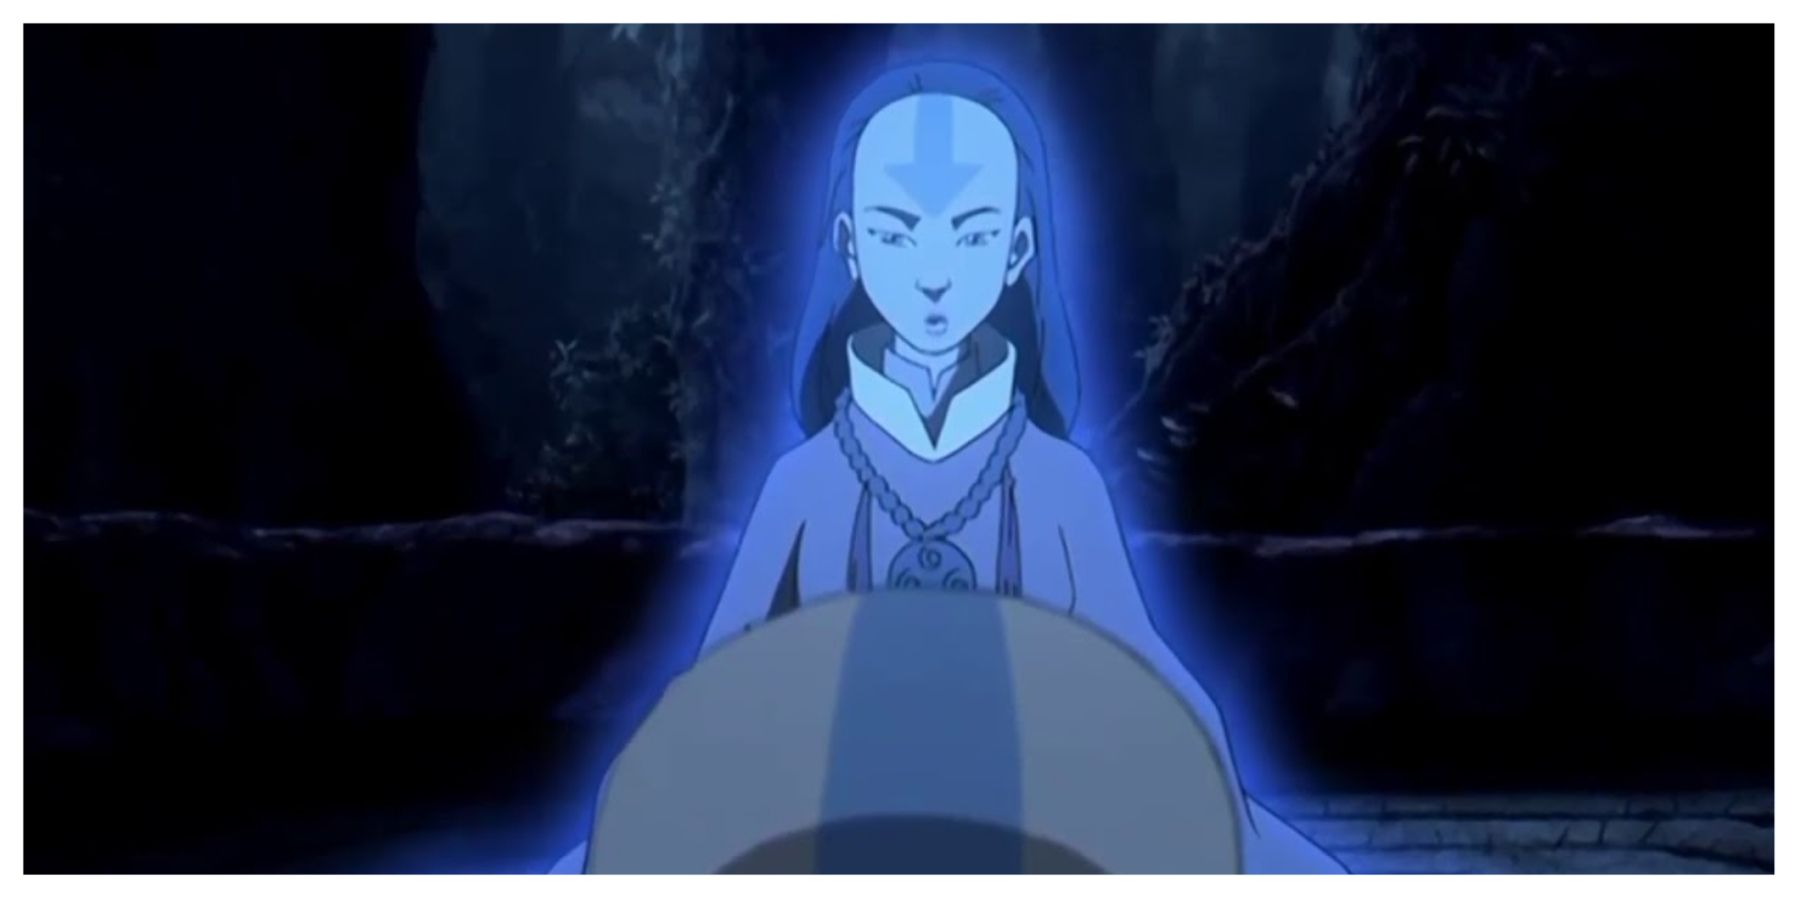 Avatar Yangchen Meeting With Aang on the Island Turtle in Avatar: The Last Airbender